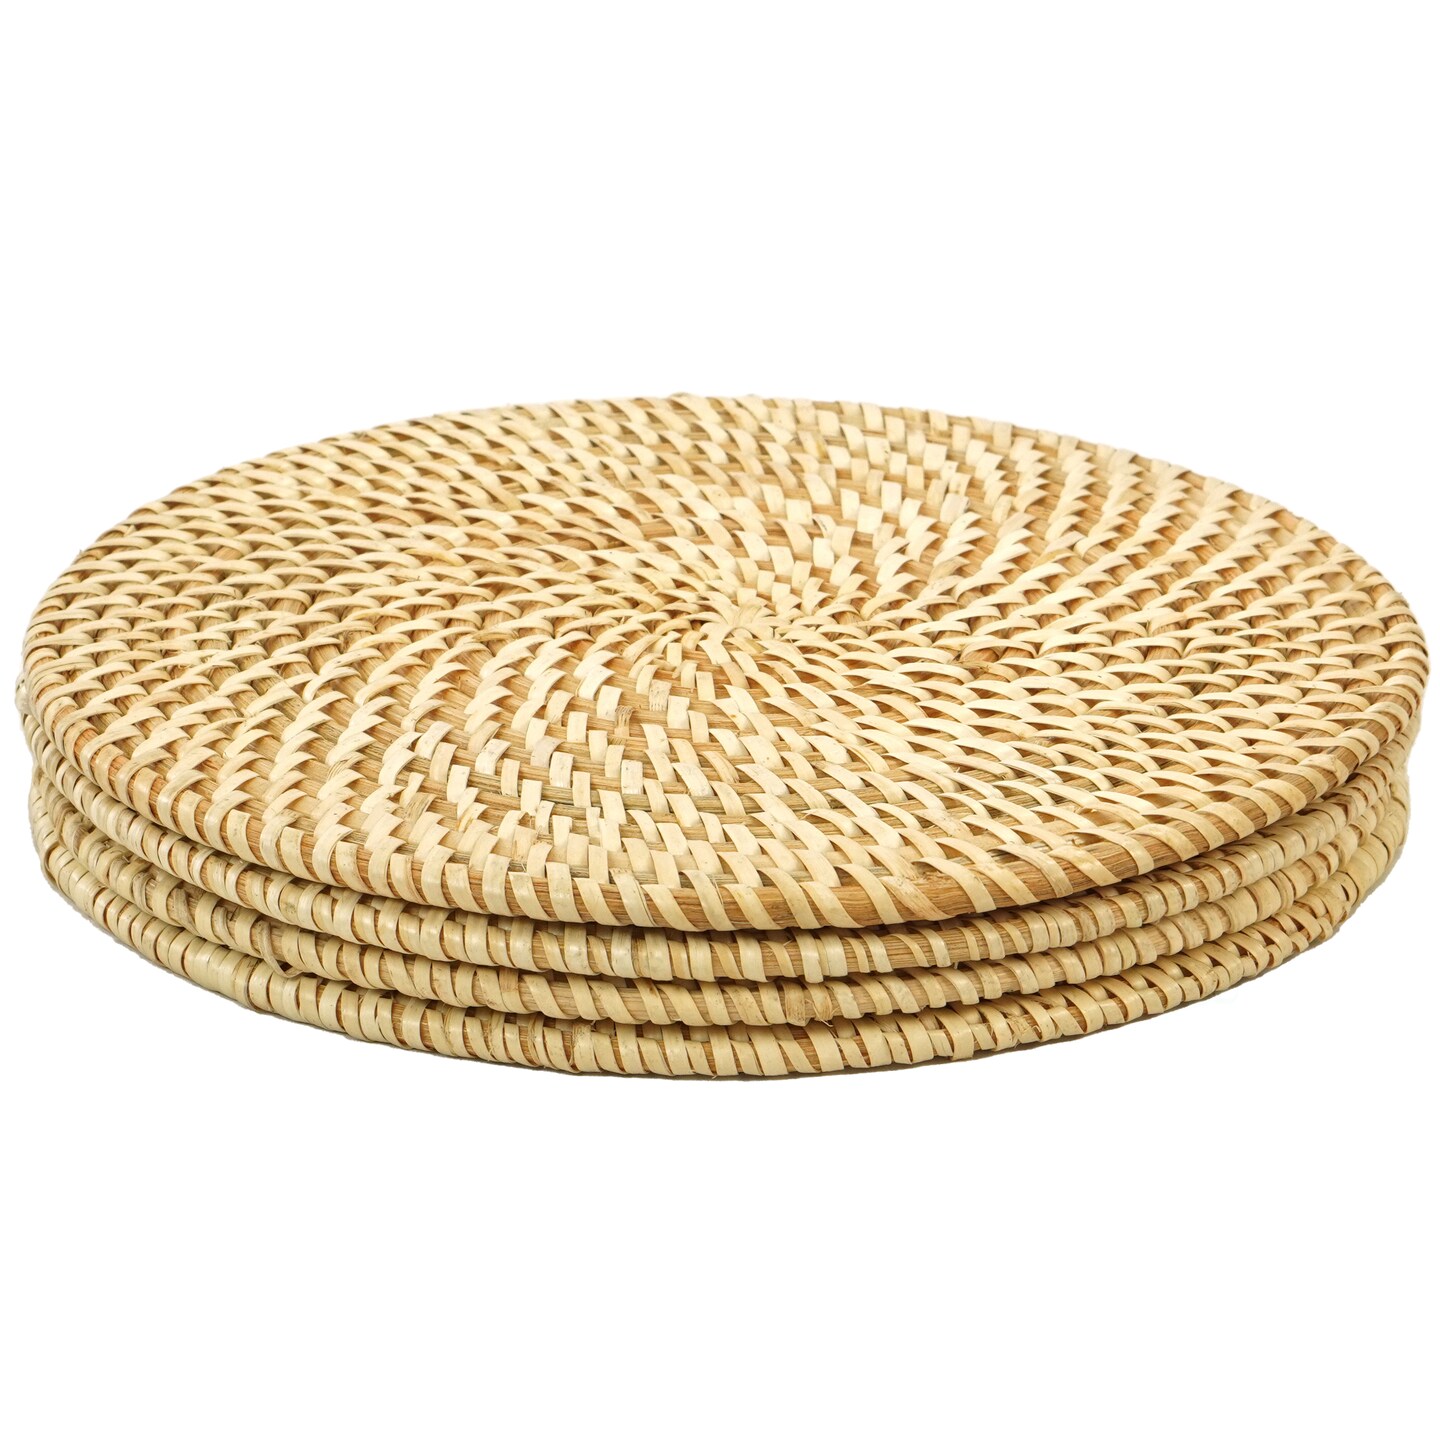 Set of 4 Decorative Round Natural Woven Handmade Rattan Placemats